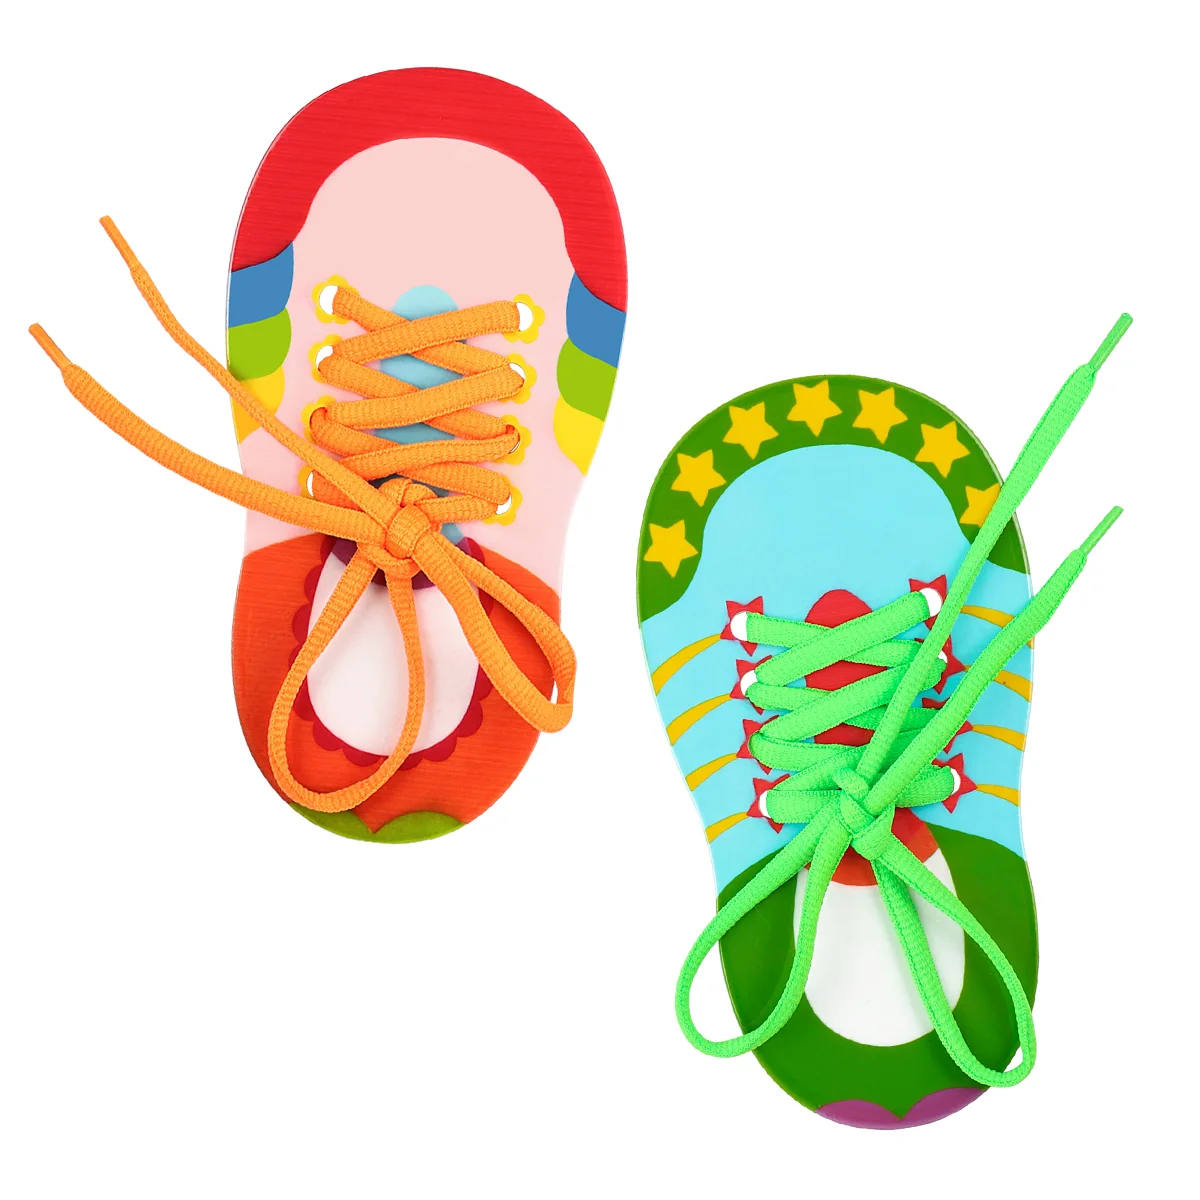 

Shoes Toys Lacing Tie Tying Shoe Practice Toy Model Shoelace Threading Teaching Learn Kids Shoelaces Laces Wooden Aids Kit